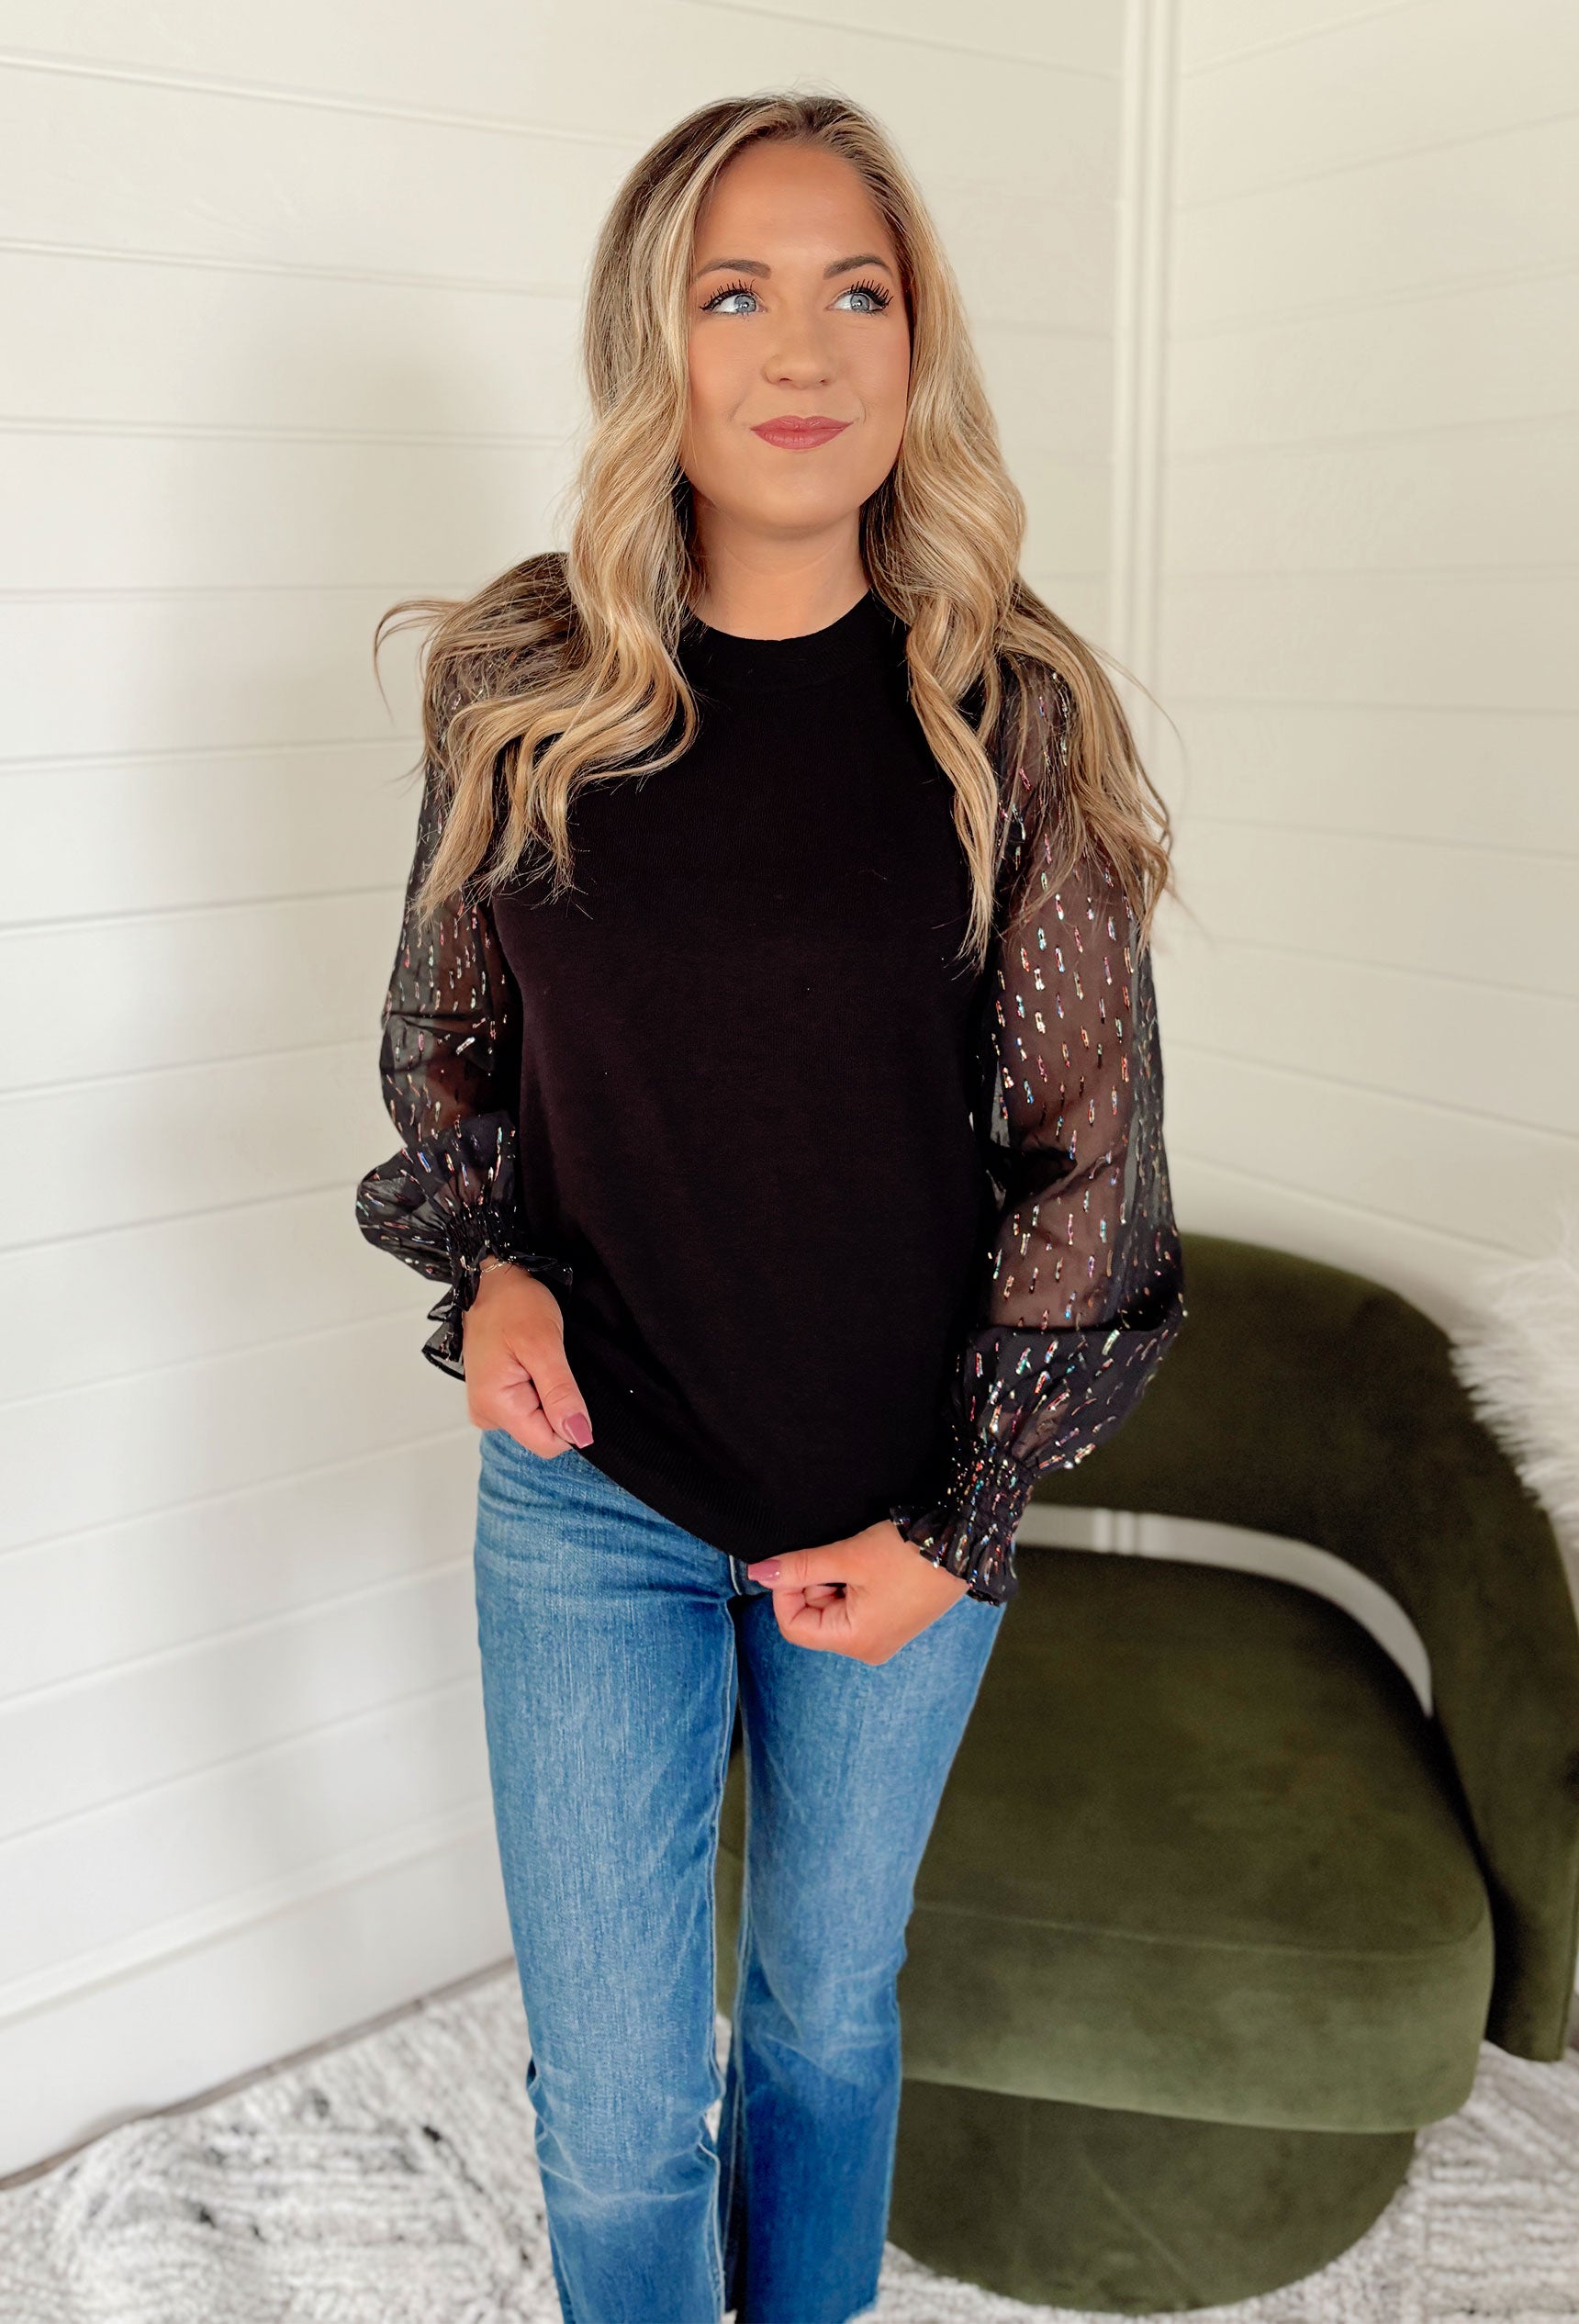 Don't Dull Your Sparkle Top, black ribbed top with sheer sleeves that have rainbow tinsel detailing